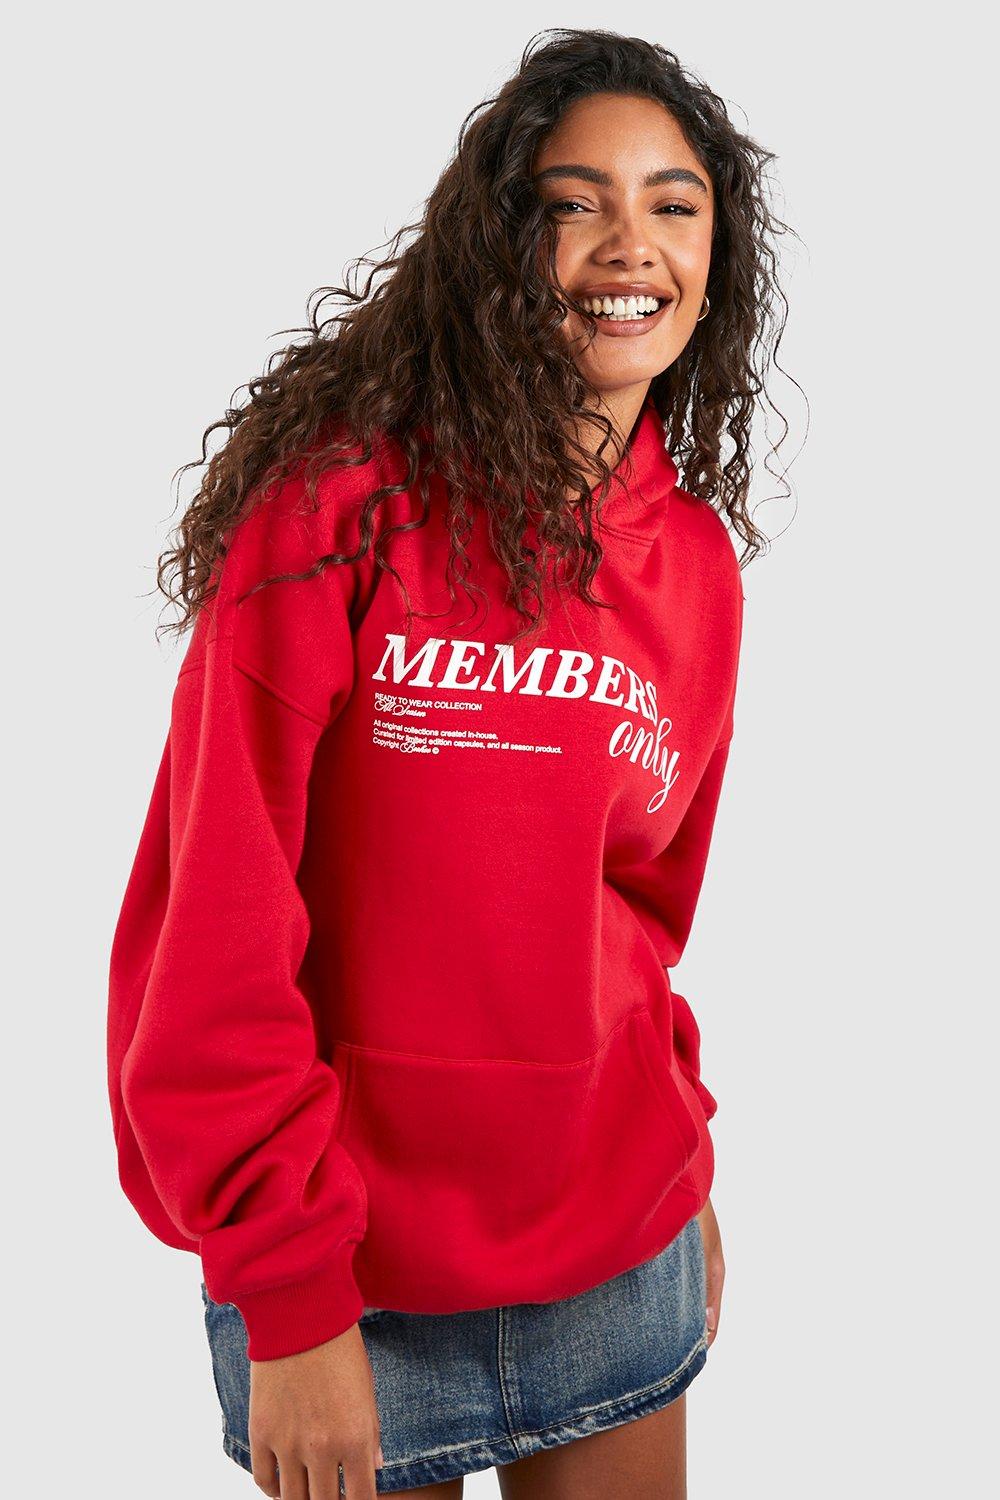 womens tall members only slogan hoodie - red - s, red